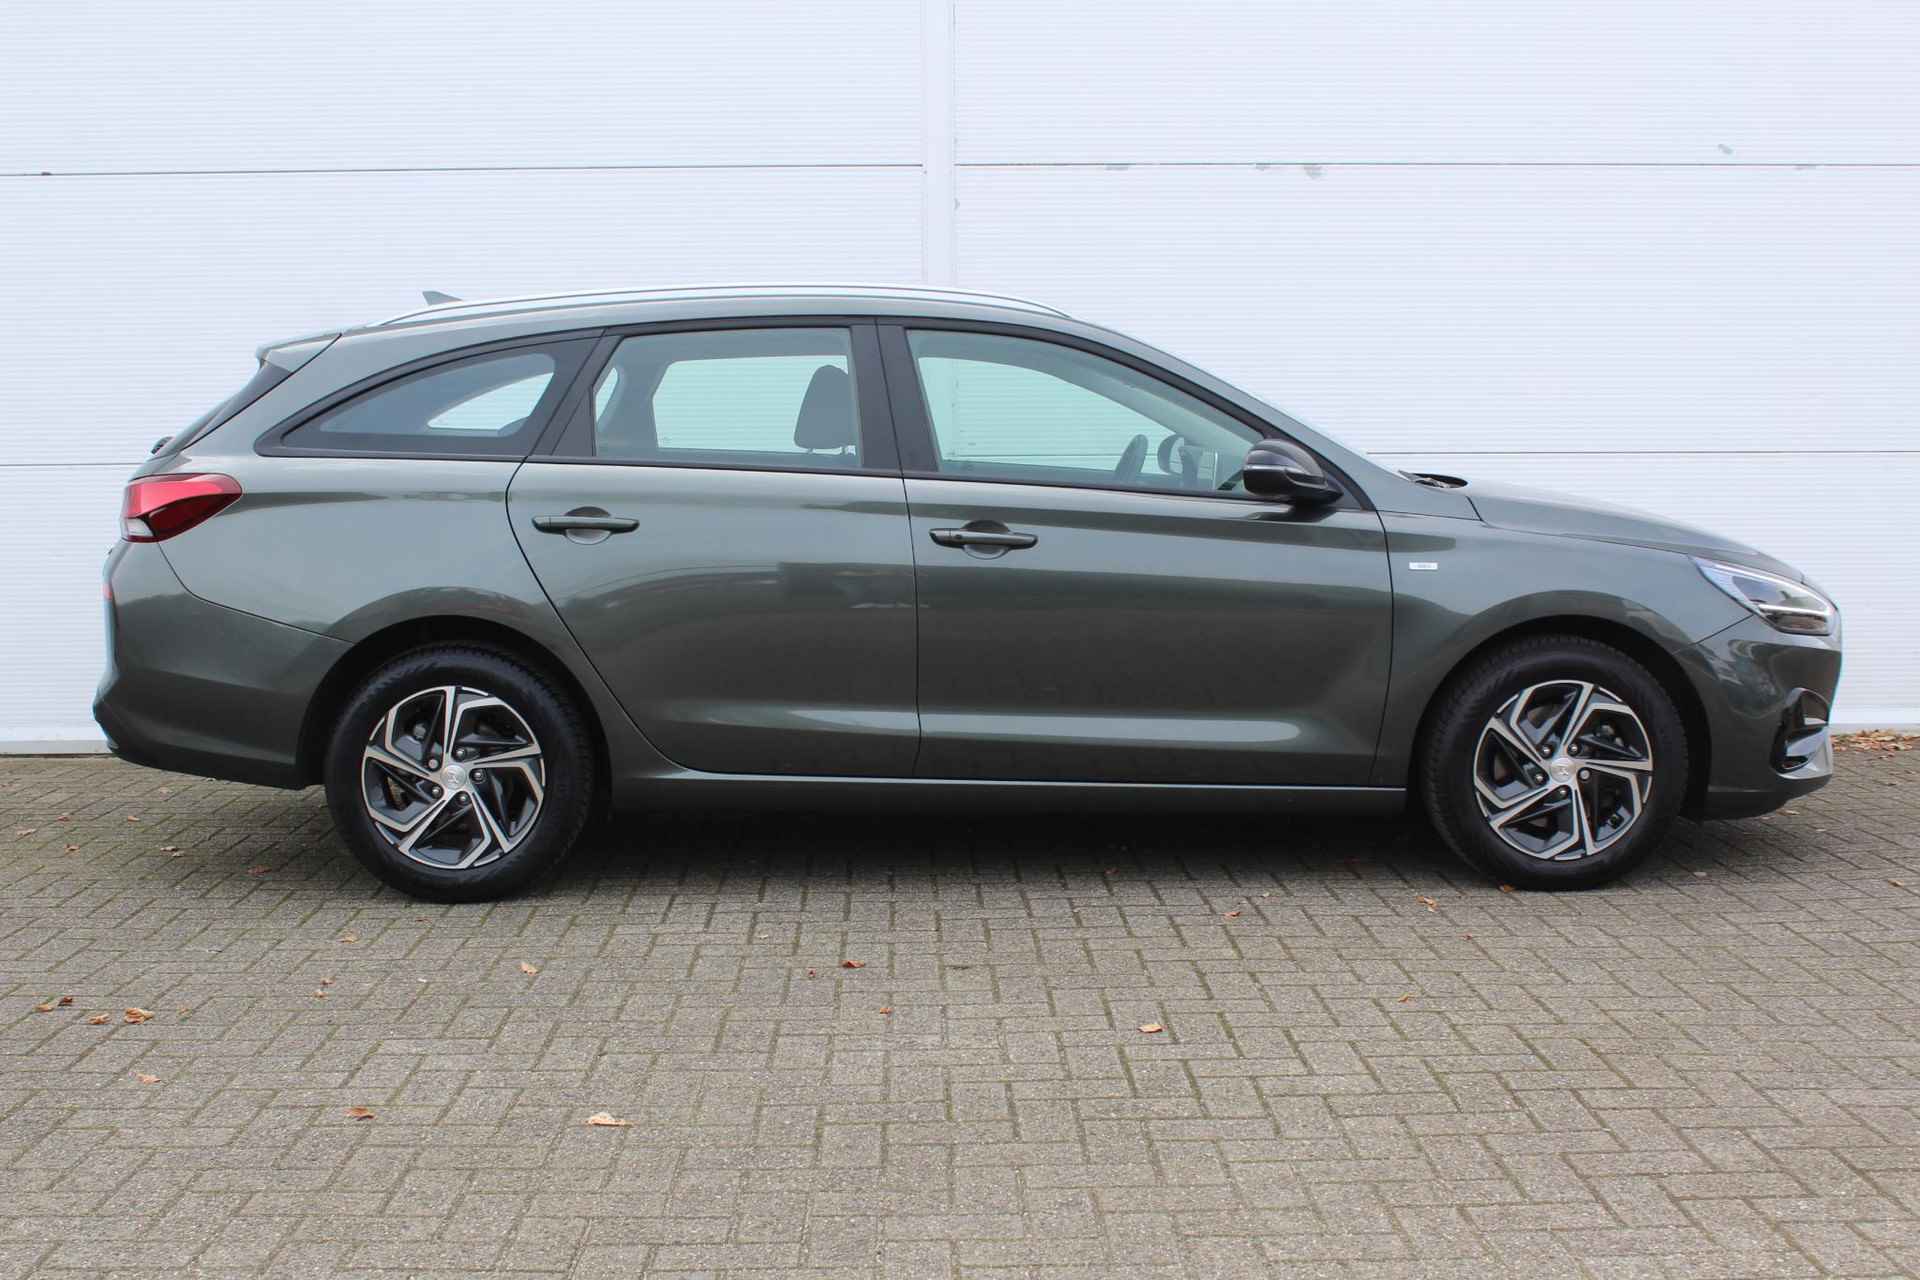 Hyundai i30 Wagon 1.0 T-GDi MHEV Comfort Smart AUTOMAAT / Navigatie + Apple Carplay/Android Auto / Cruise Control / Achteruitrijcamera / Climate Control / Keyless Entry & Start / - 17/43